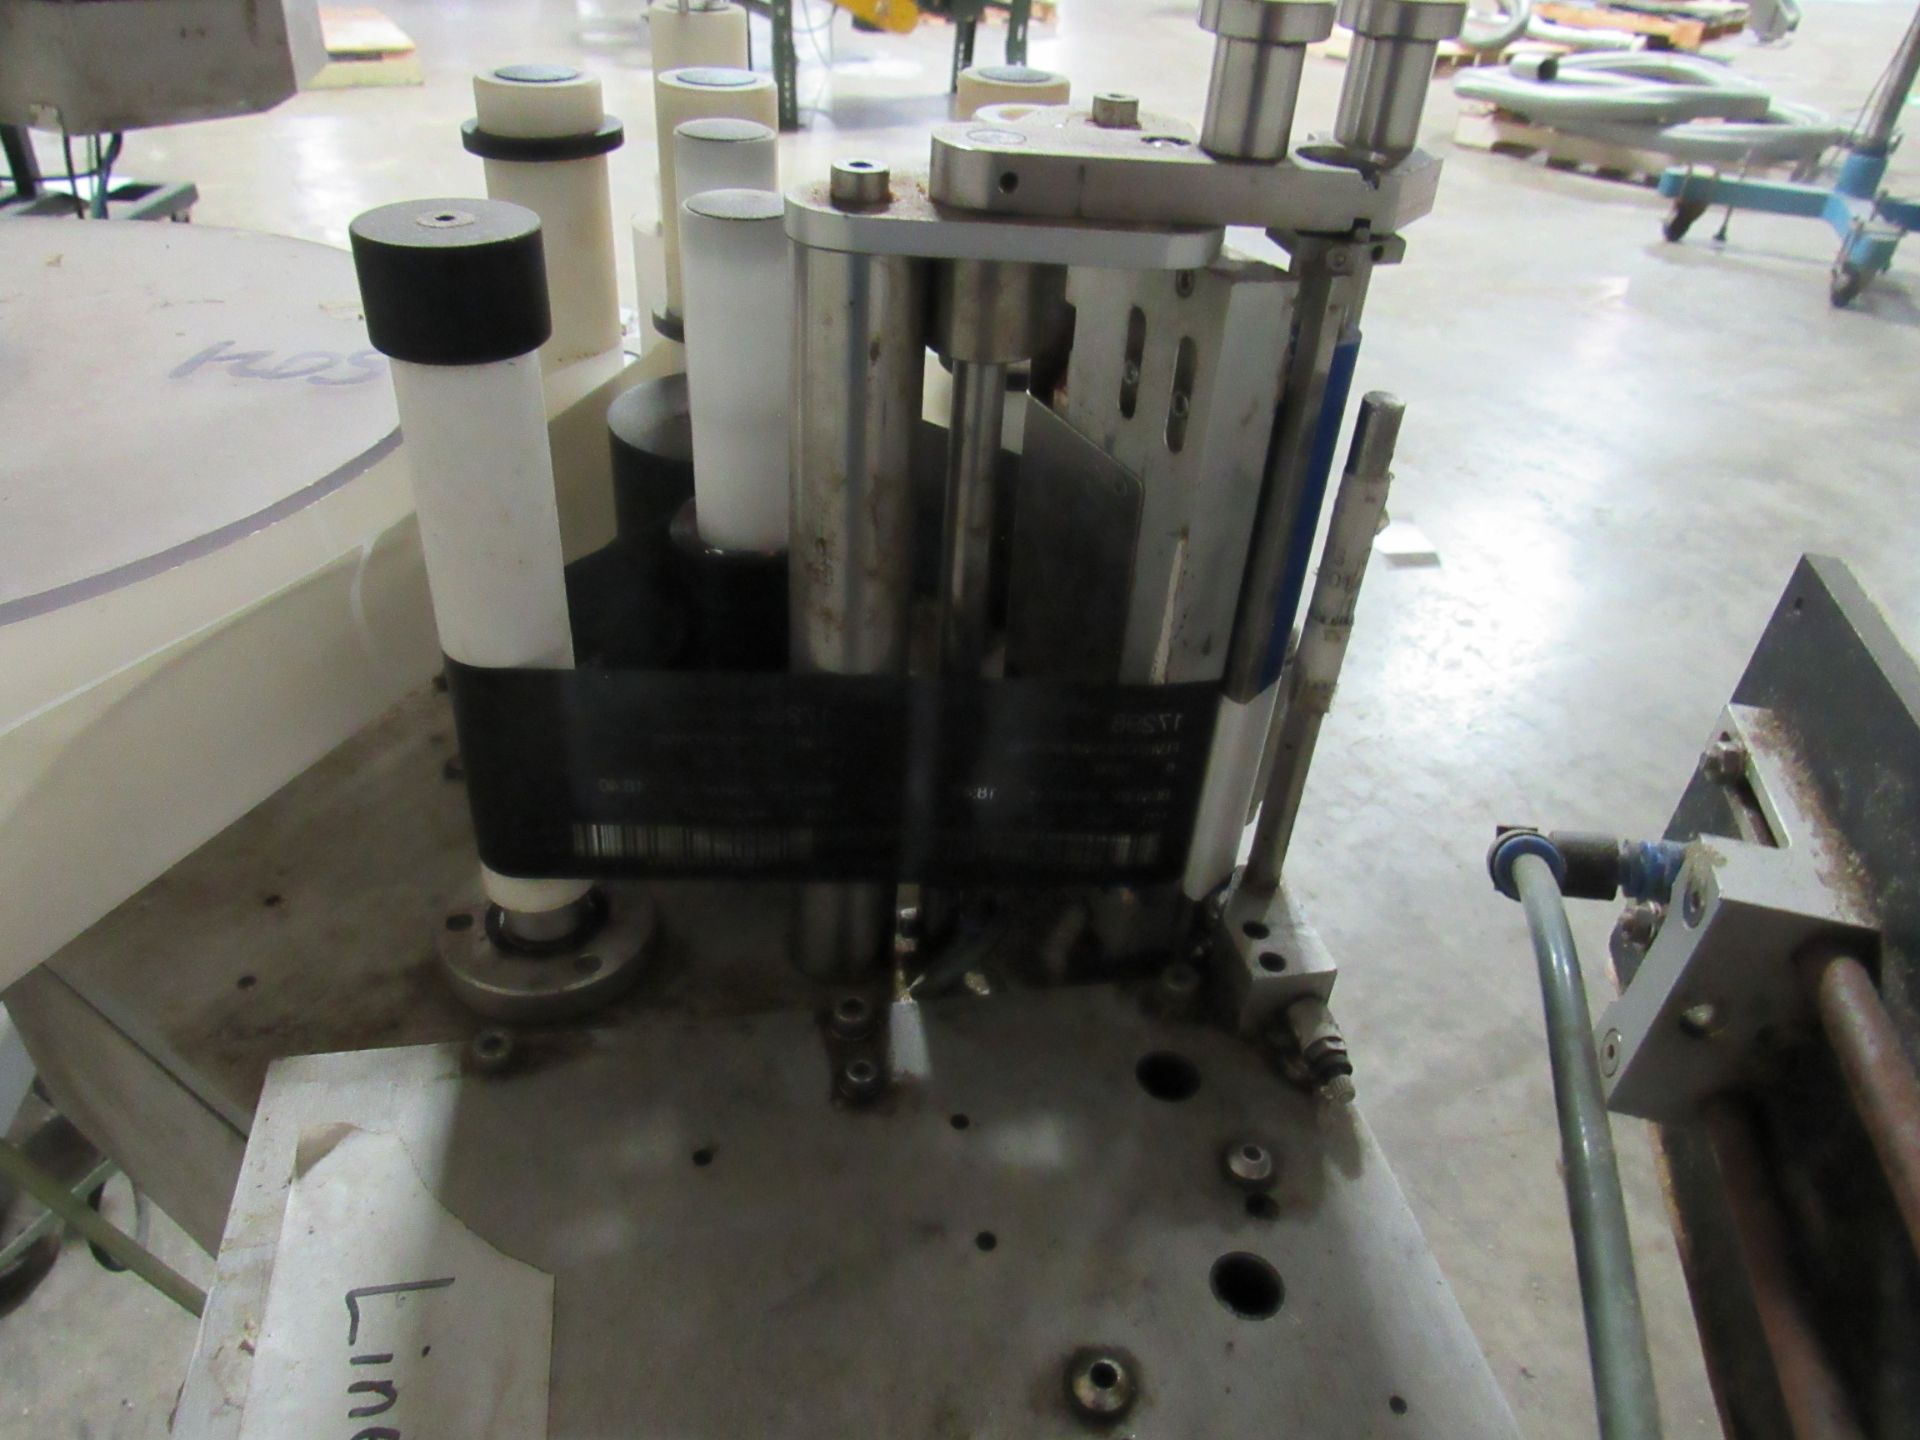 Markem CE Label Printer, Label Applicator used for labeling boxes, on Tripod Base with Casters. Free - Image 4 of 9